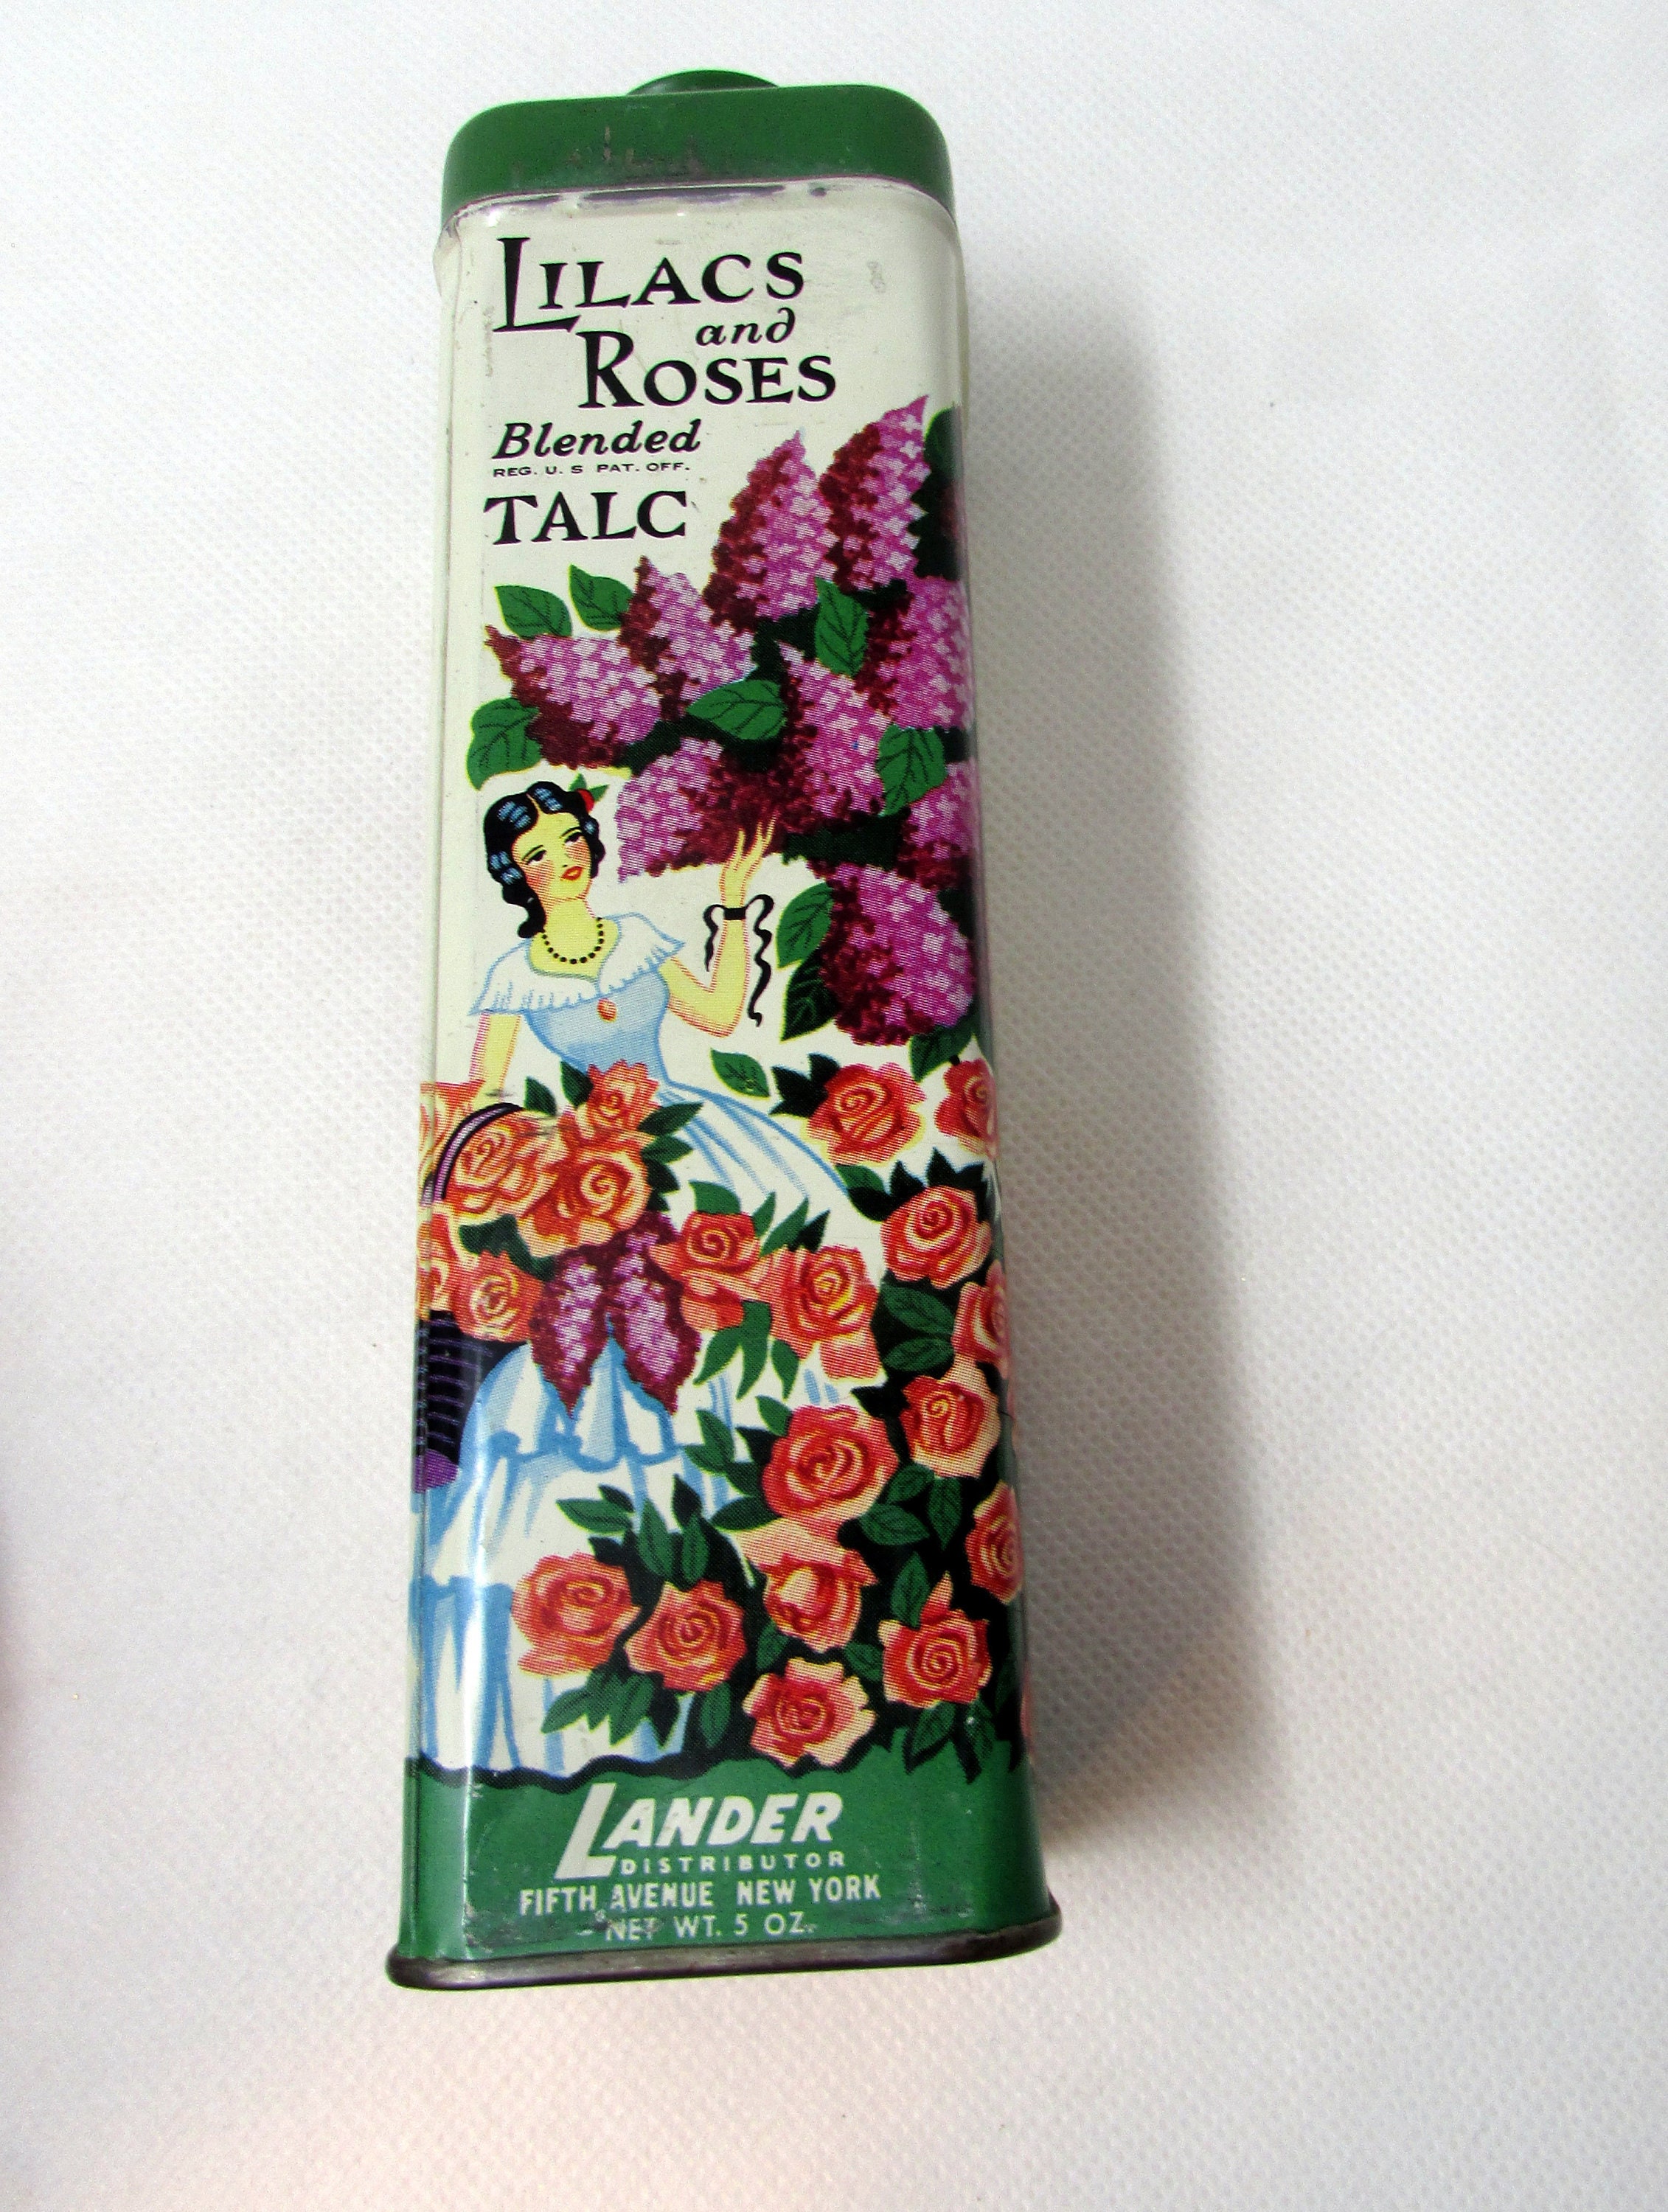 Vintage Landers Lilacs & Roses Blended Talc Tin, 1940's Powder, Nearly Full Floral Tin